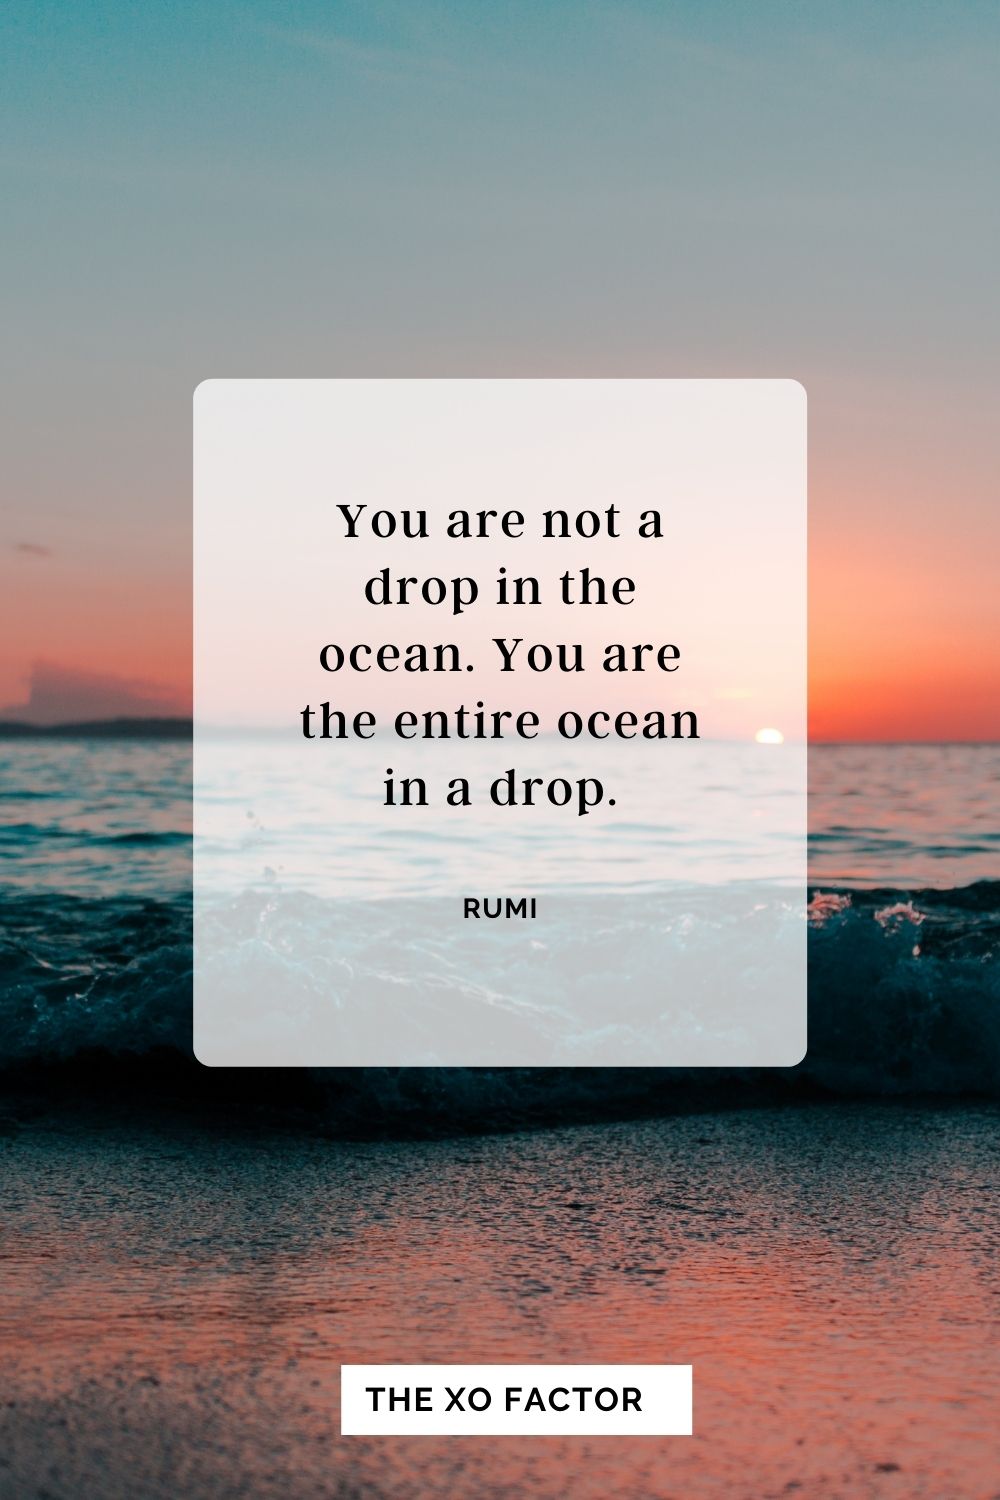 You are not a drop in the ocean. You are the entire ocean in a drop. Rumi